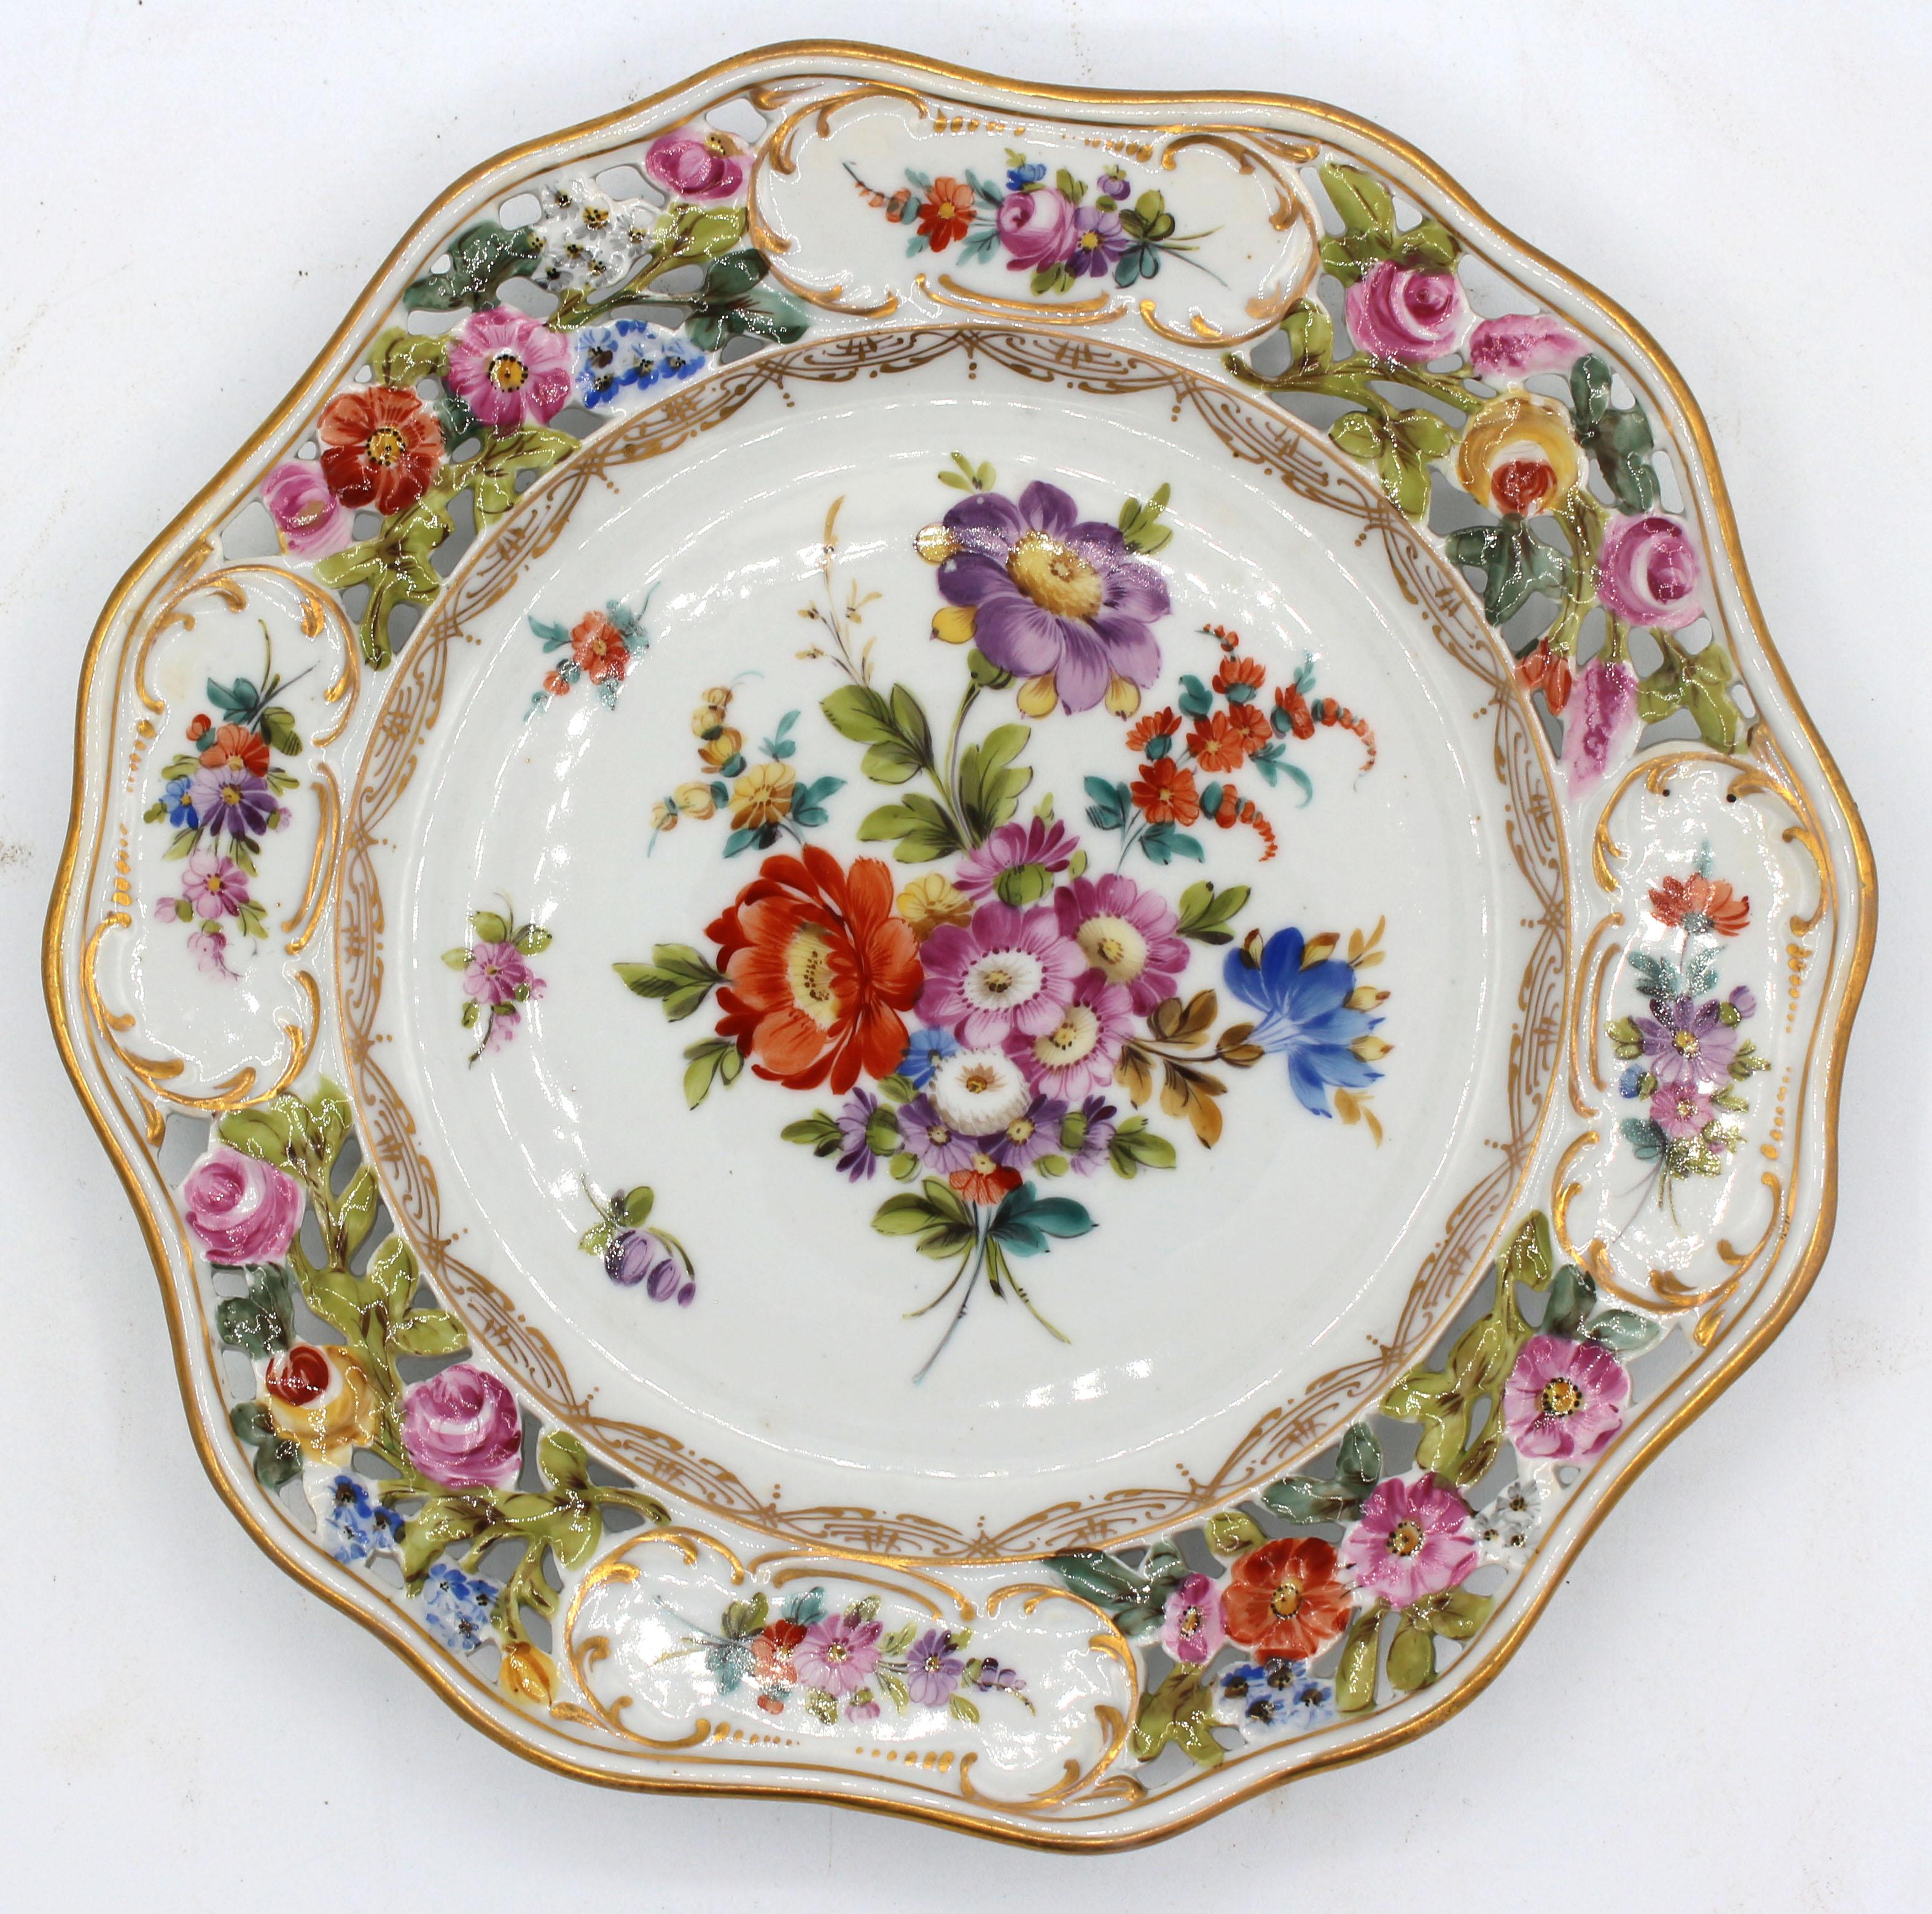 Circa 1902-1911 Facing Pair of Reticulated Porcelain Dessert Plates, Carl Thieme In Good Condition For Sale In Chapel Hill, NC